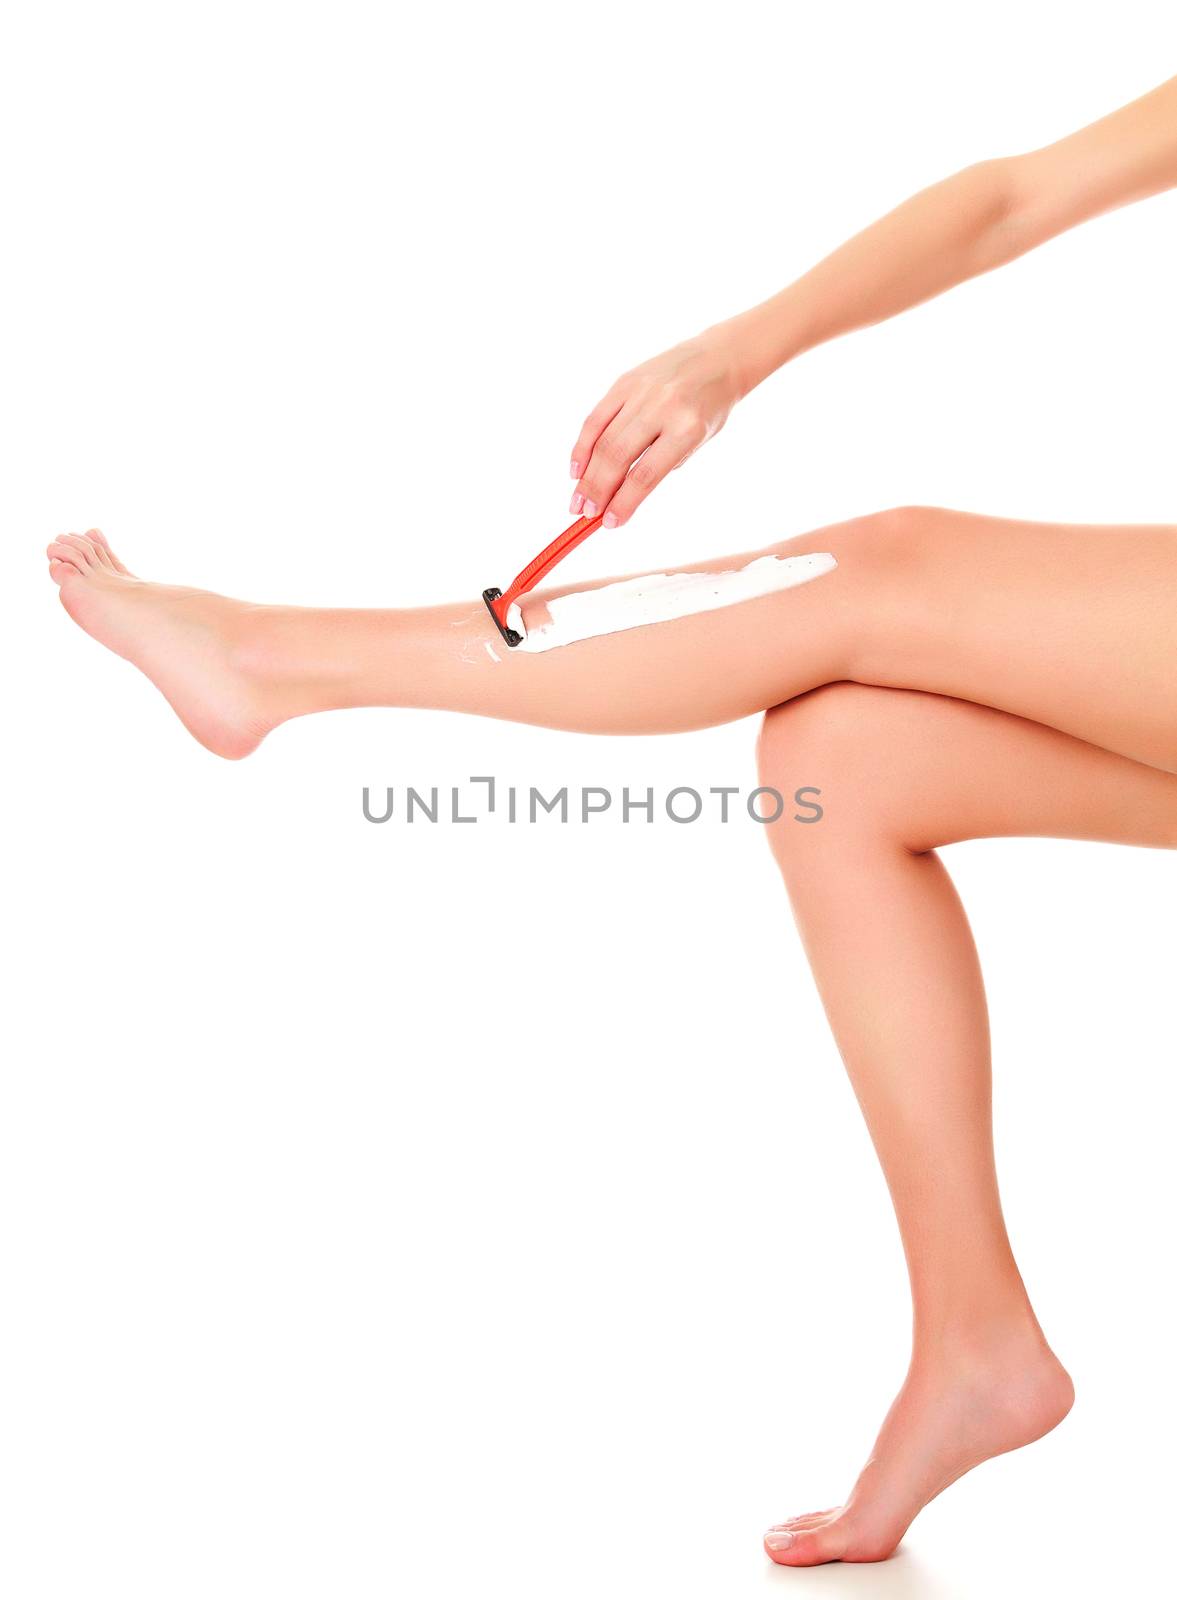 Woman shaves her leg, isolated on white background